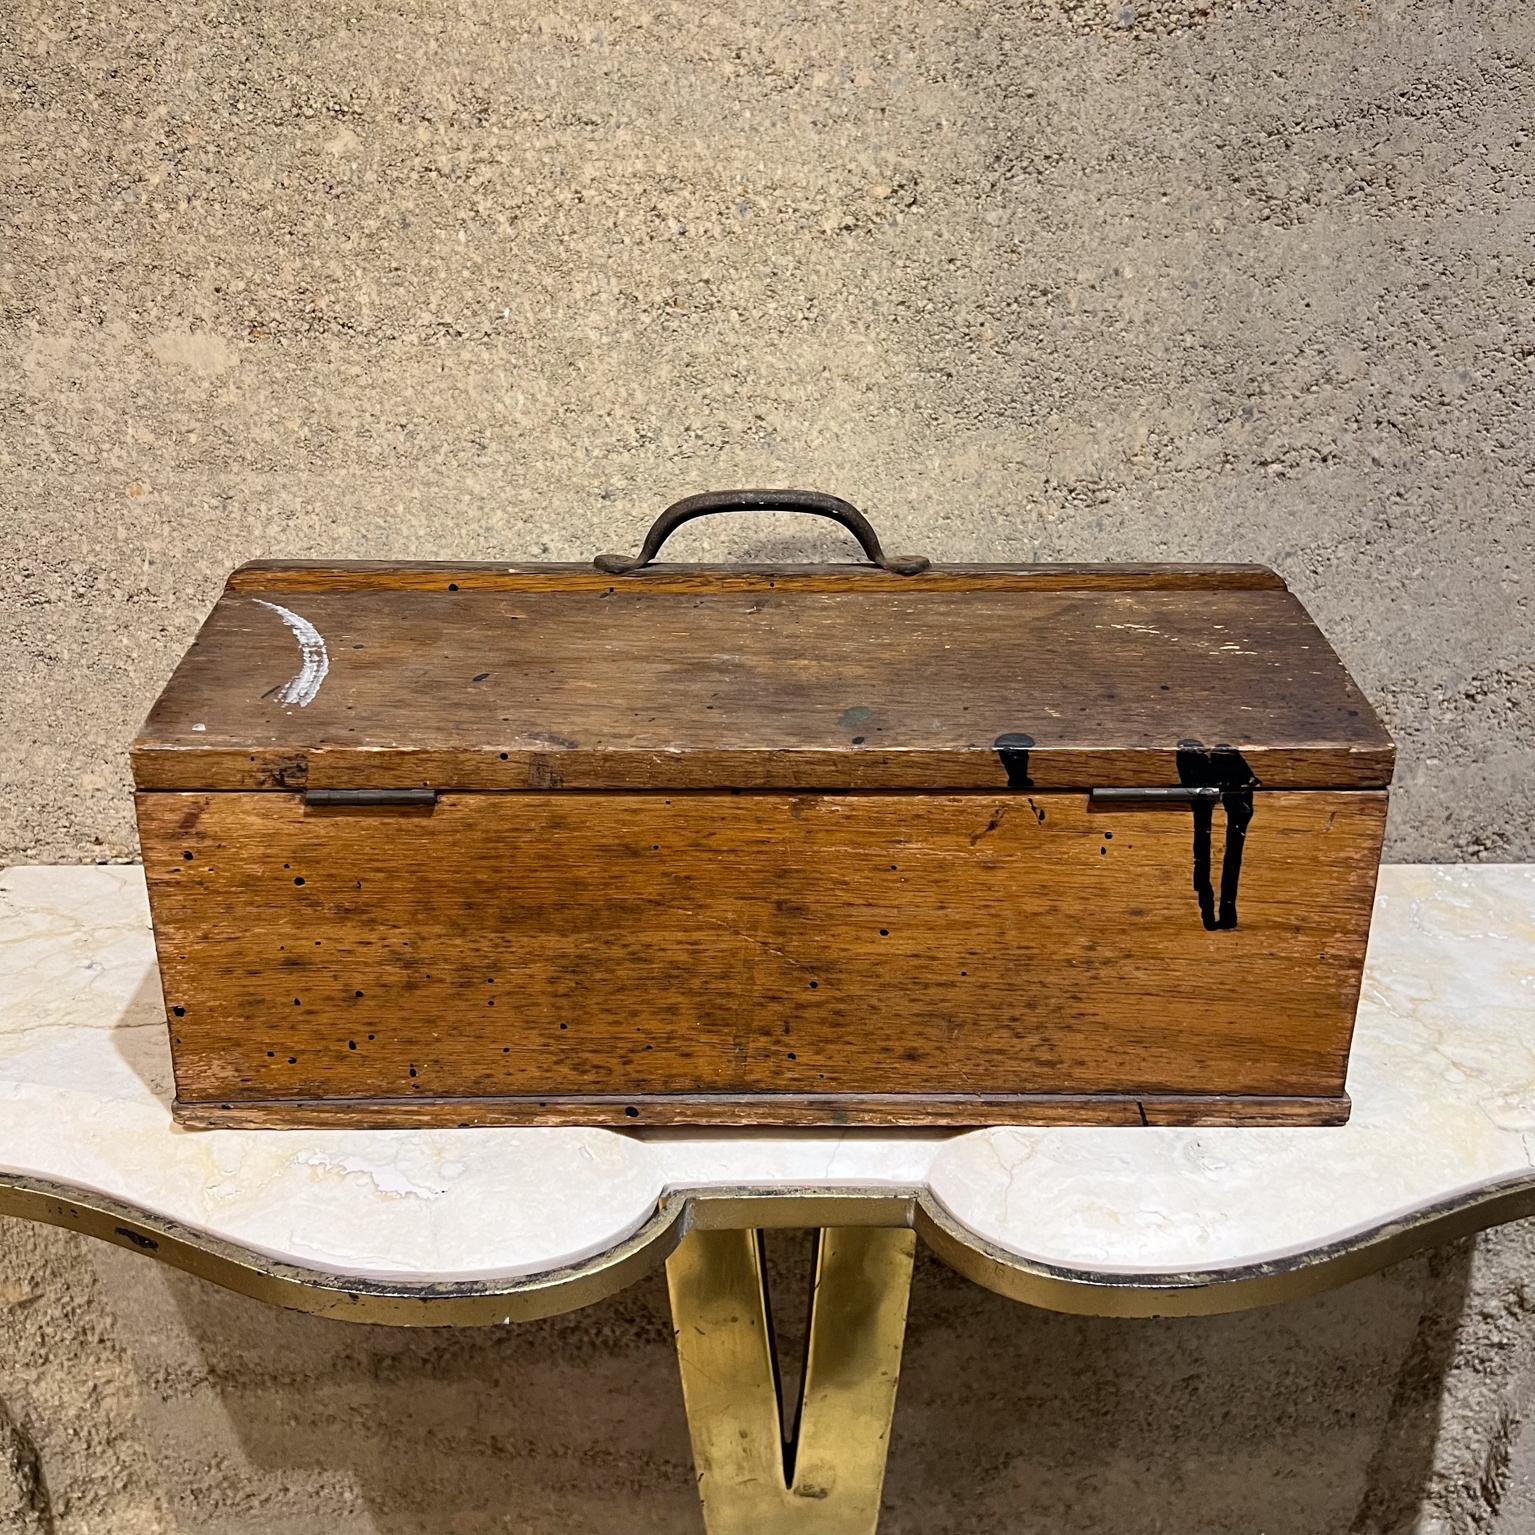 
Solid Oak Wood Hinged Toolbox Carry Handle
Brass label.
Hammacher Schlemmer NY
patina present unrestored original vintage condition
7 h x 15 w x 9 d
See all images provided.